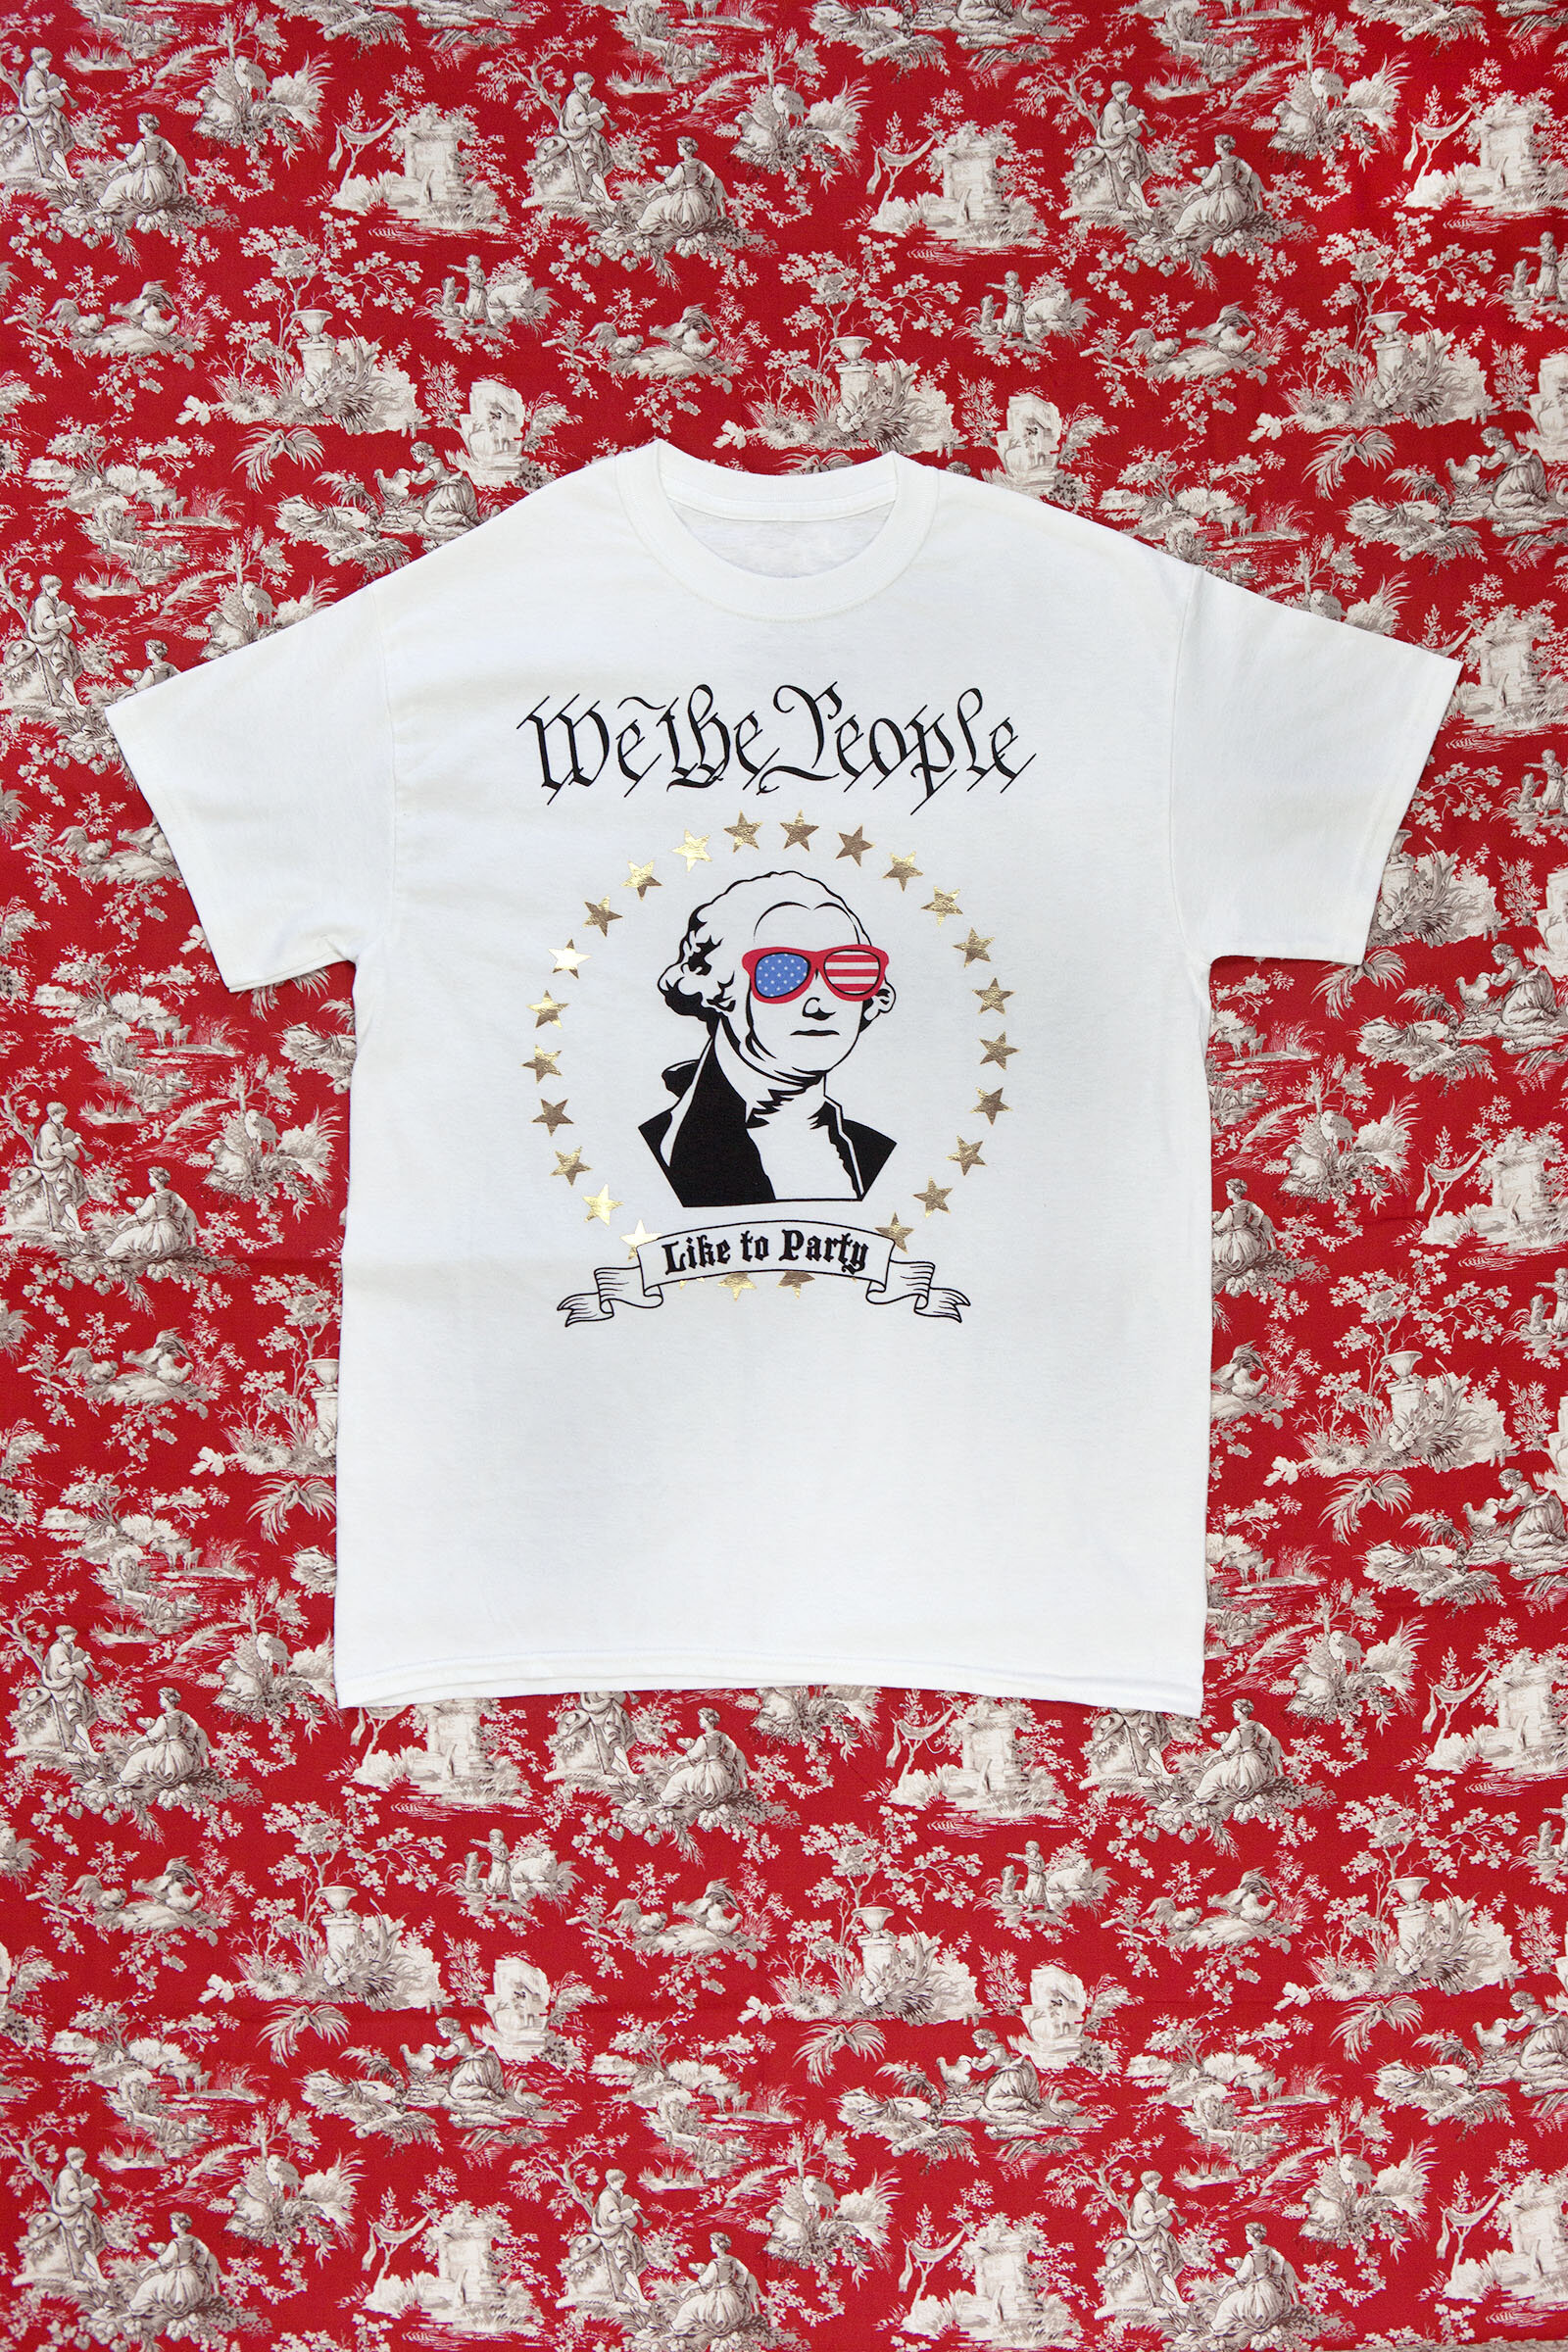 We the People Shirt, 2019